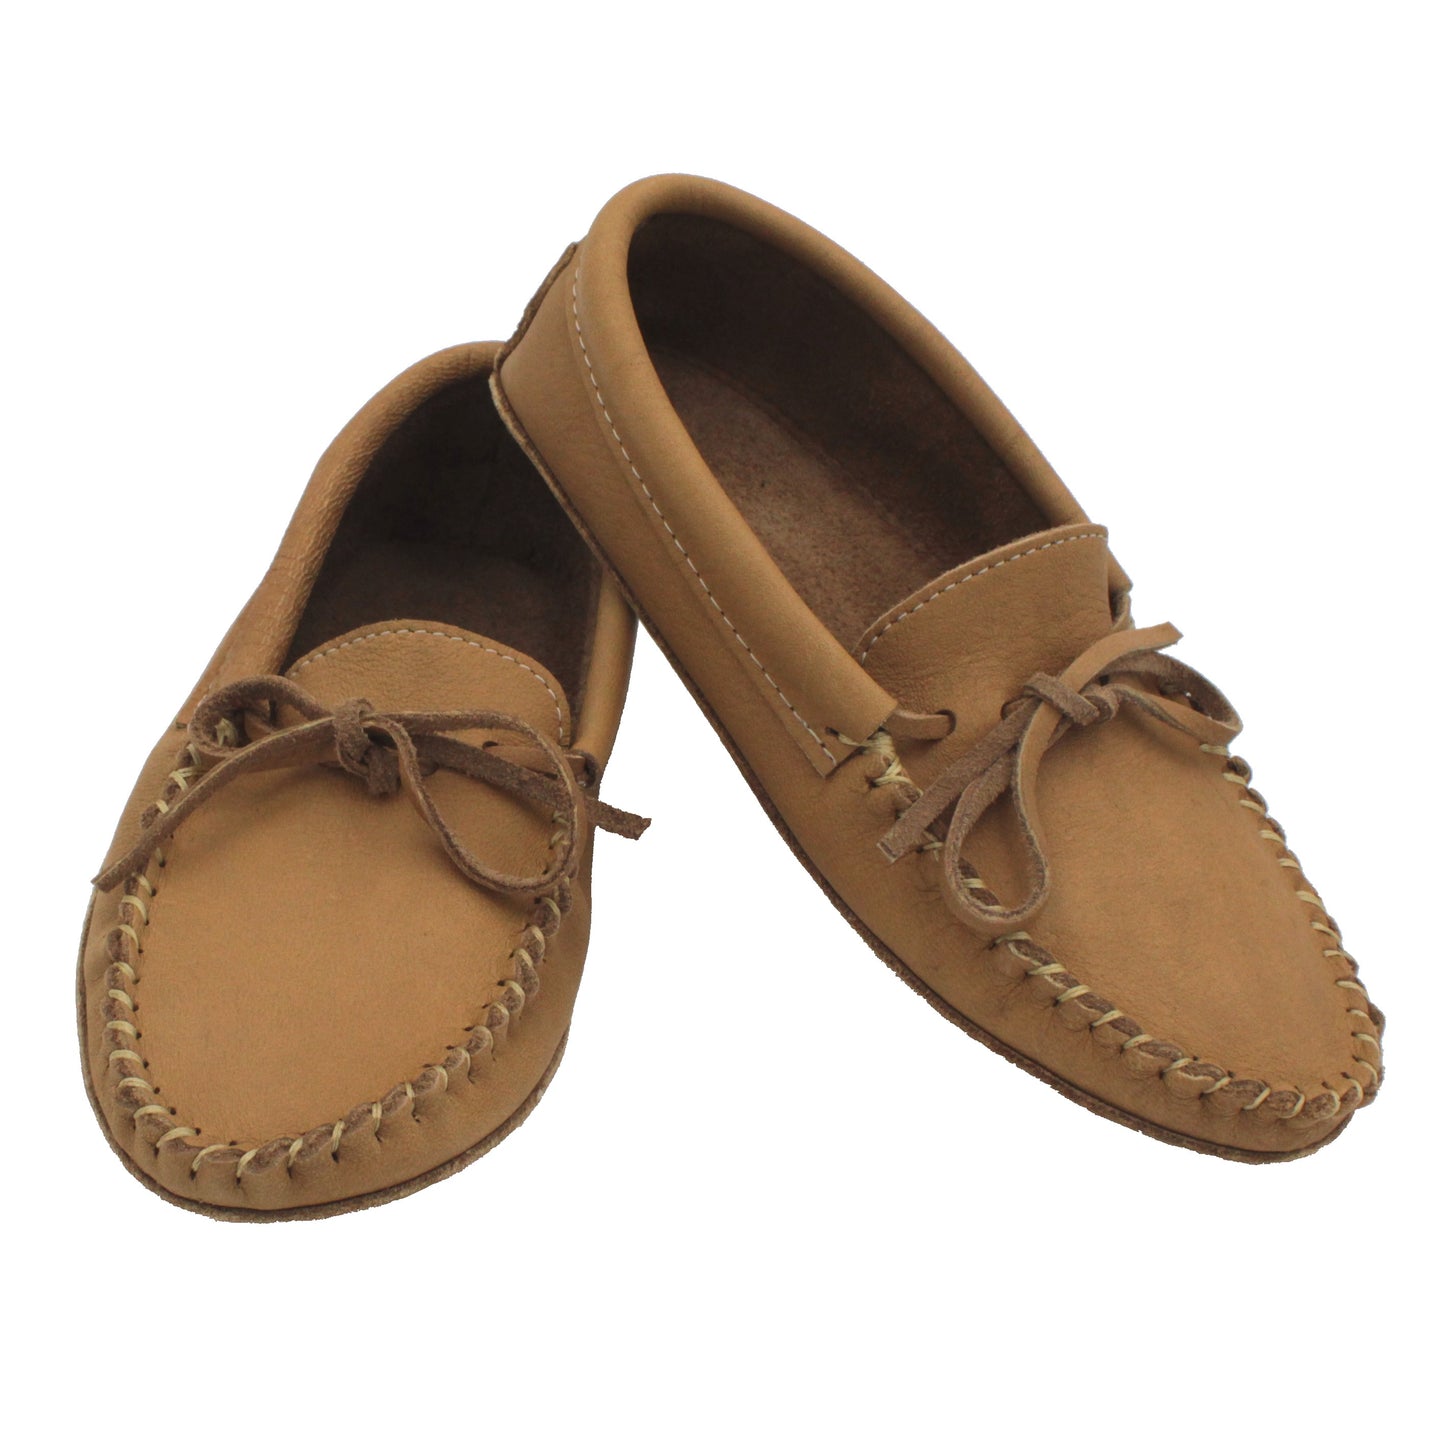 Soft Sole Leather Moccasins